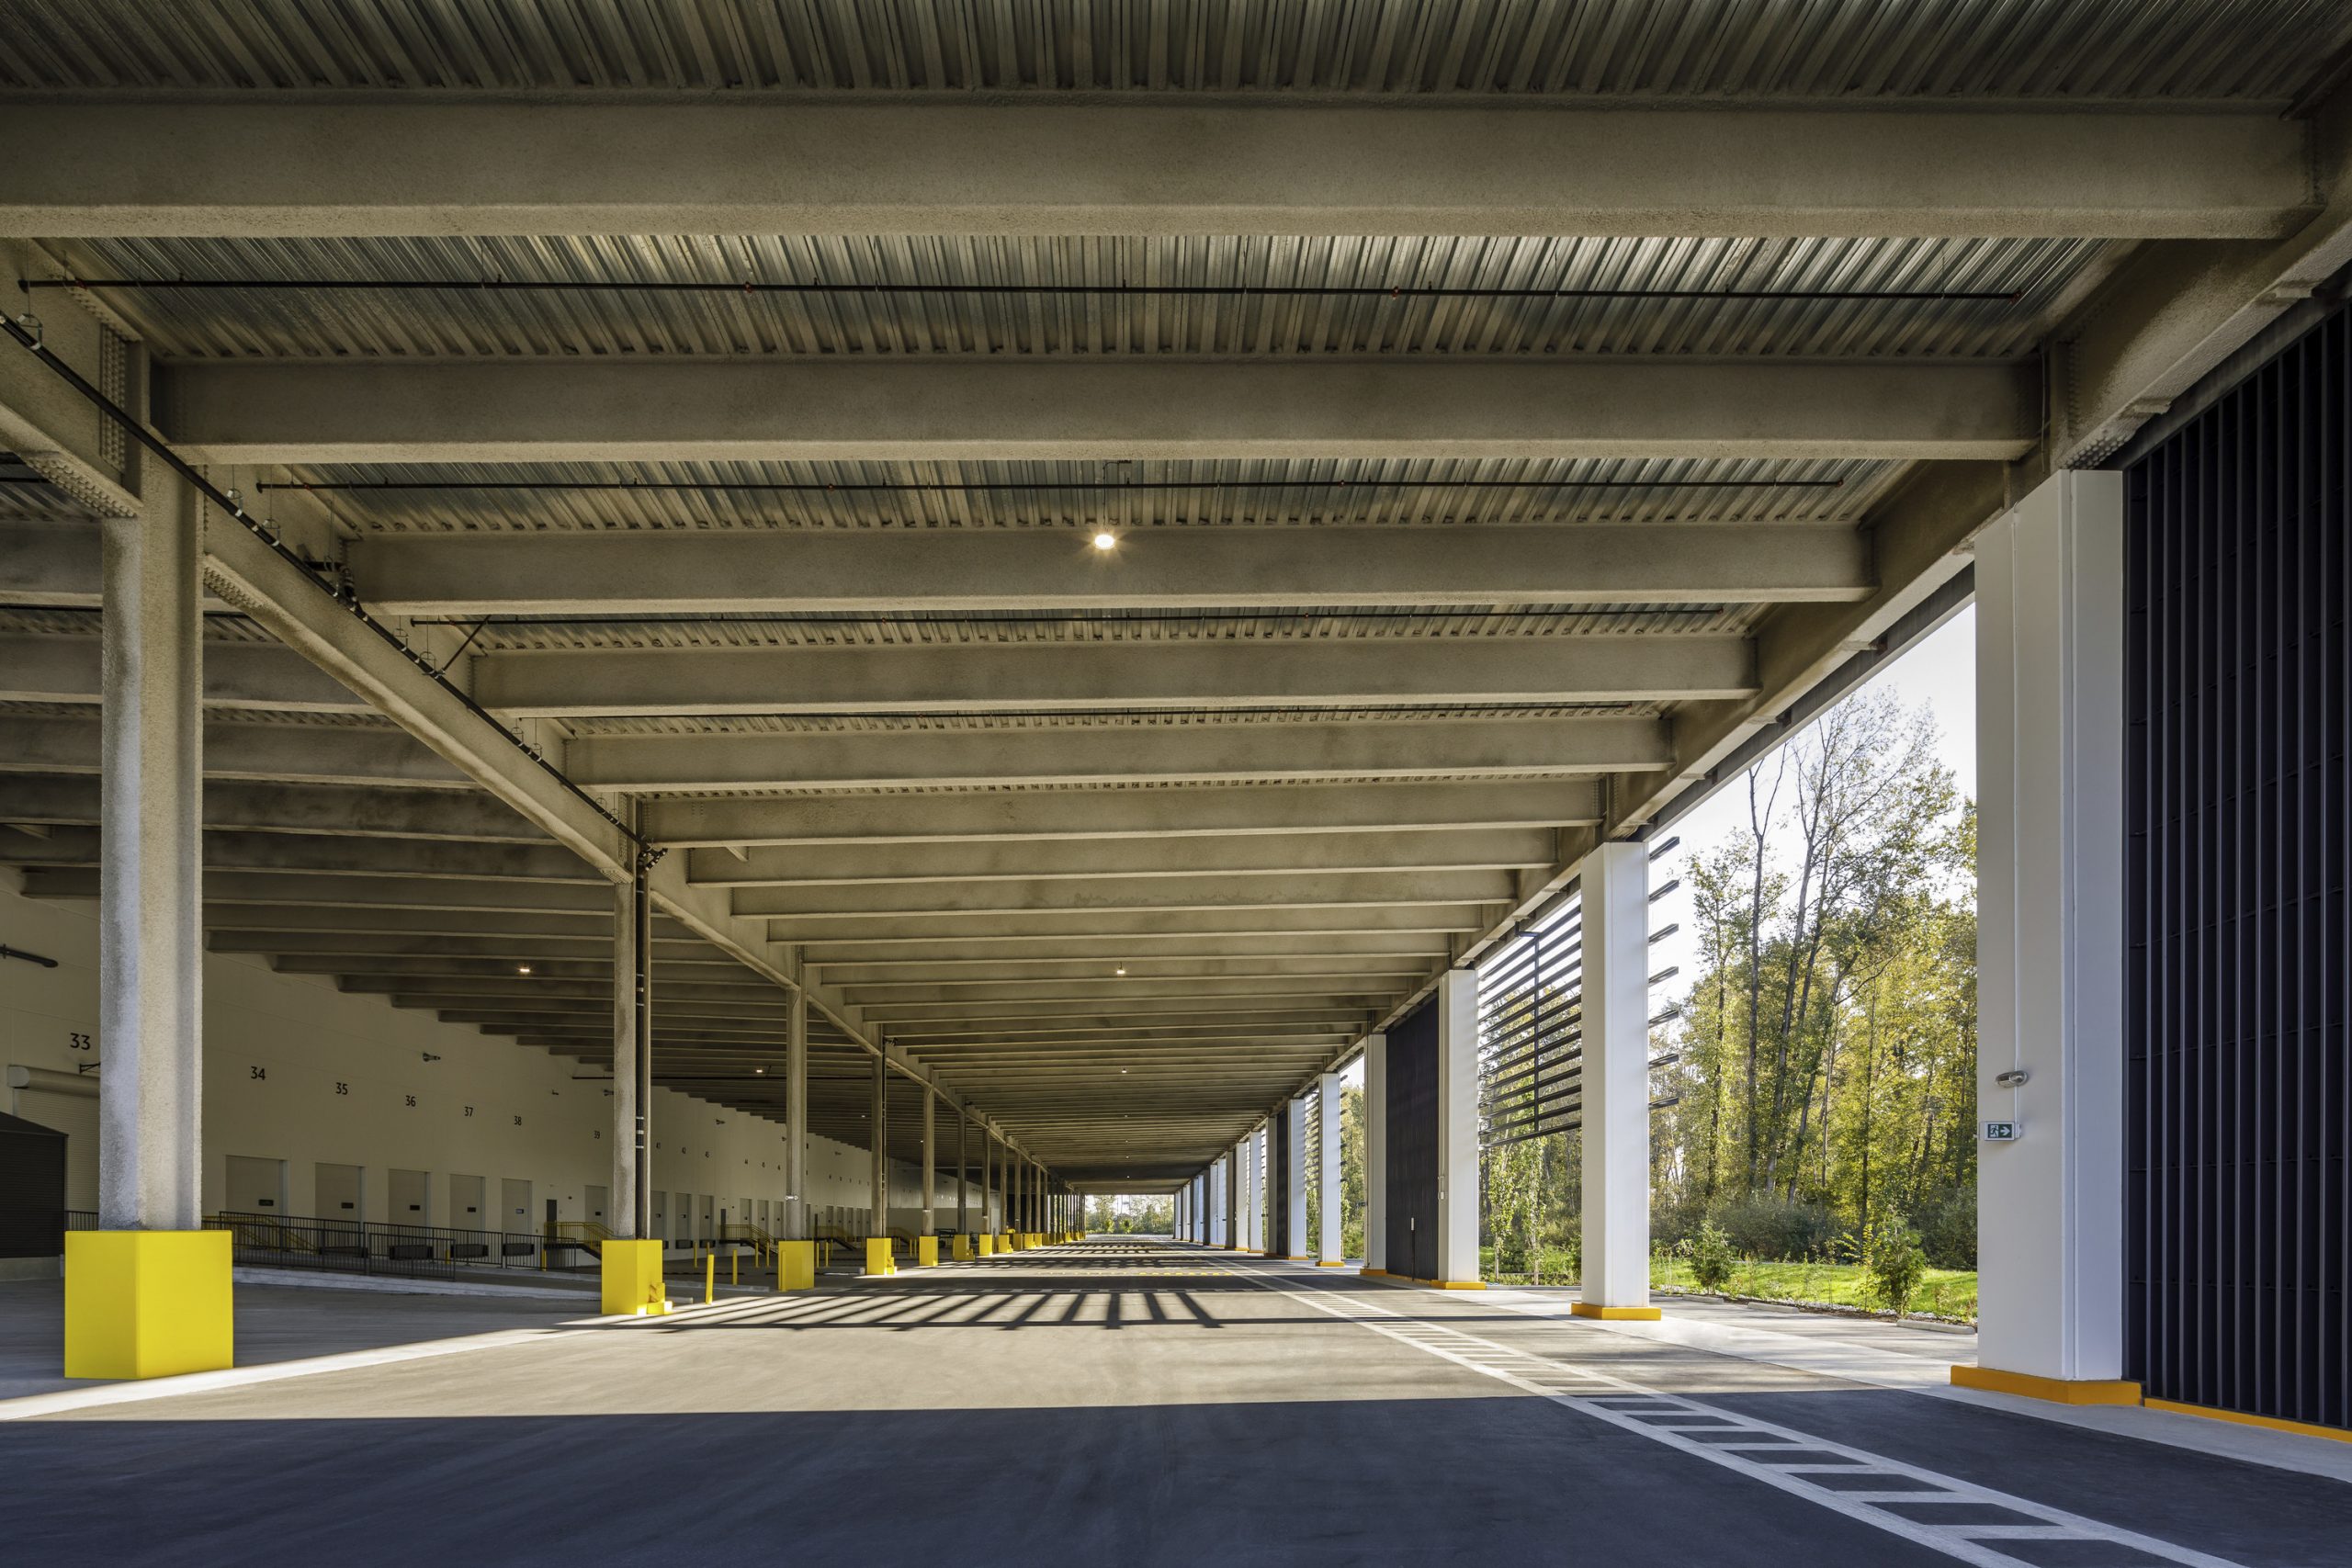 Construction completed on Canada’s first multi-story distribution center, Photo ©Luke Potter